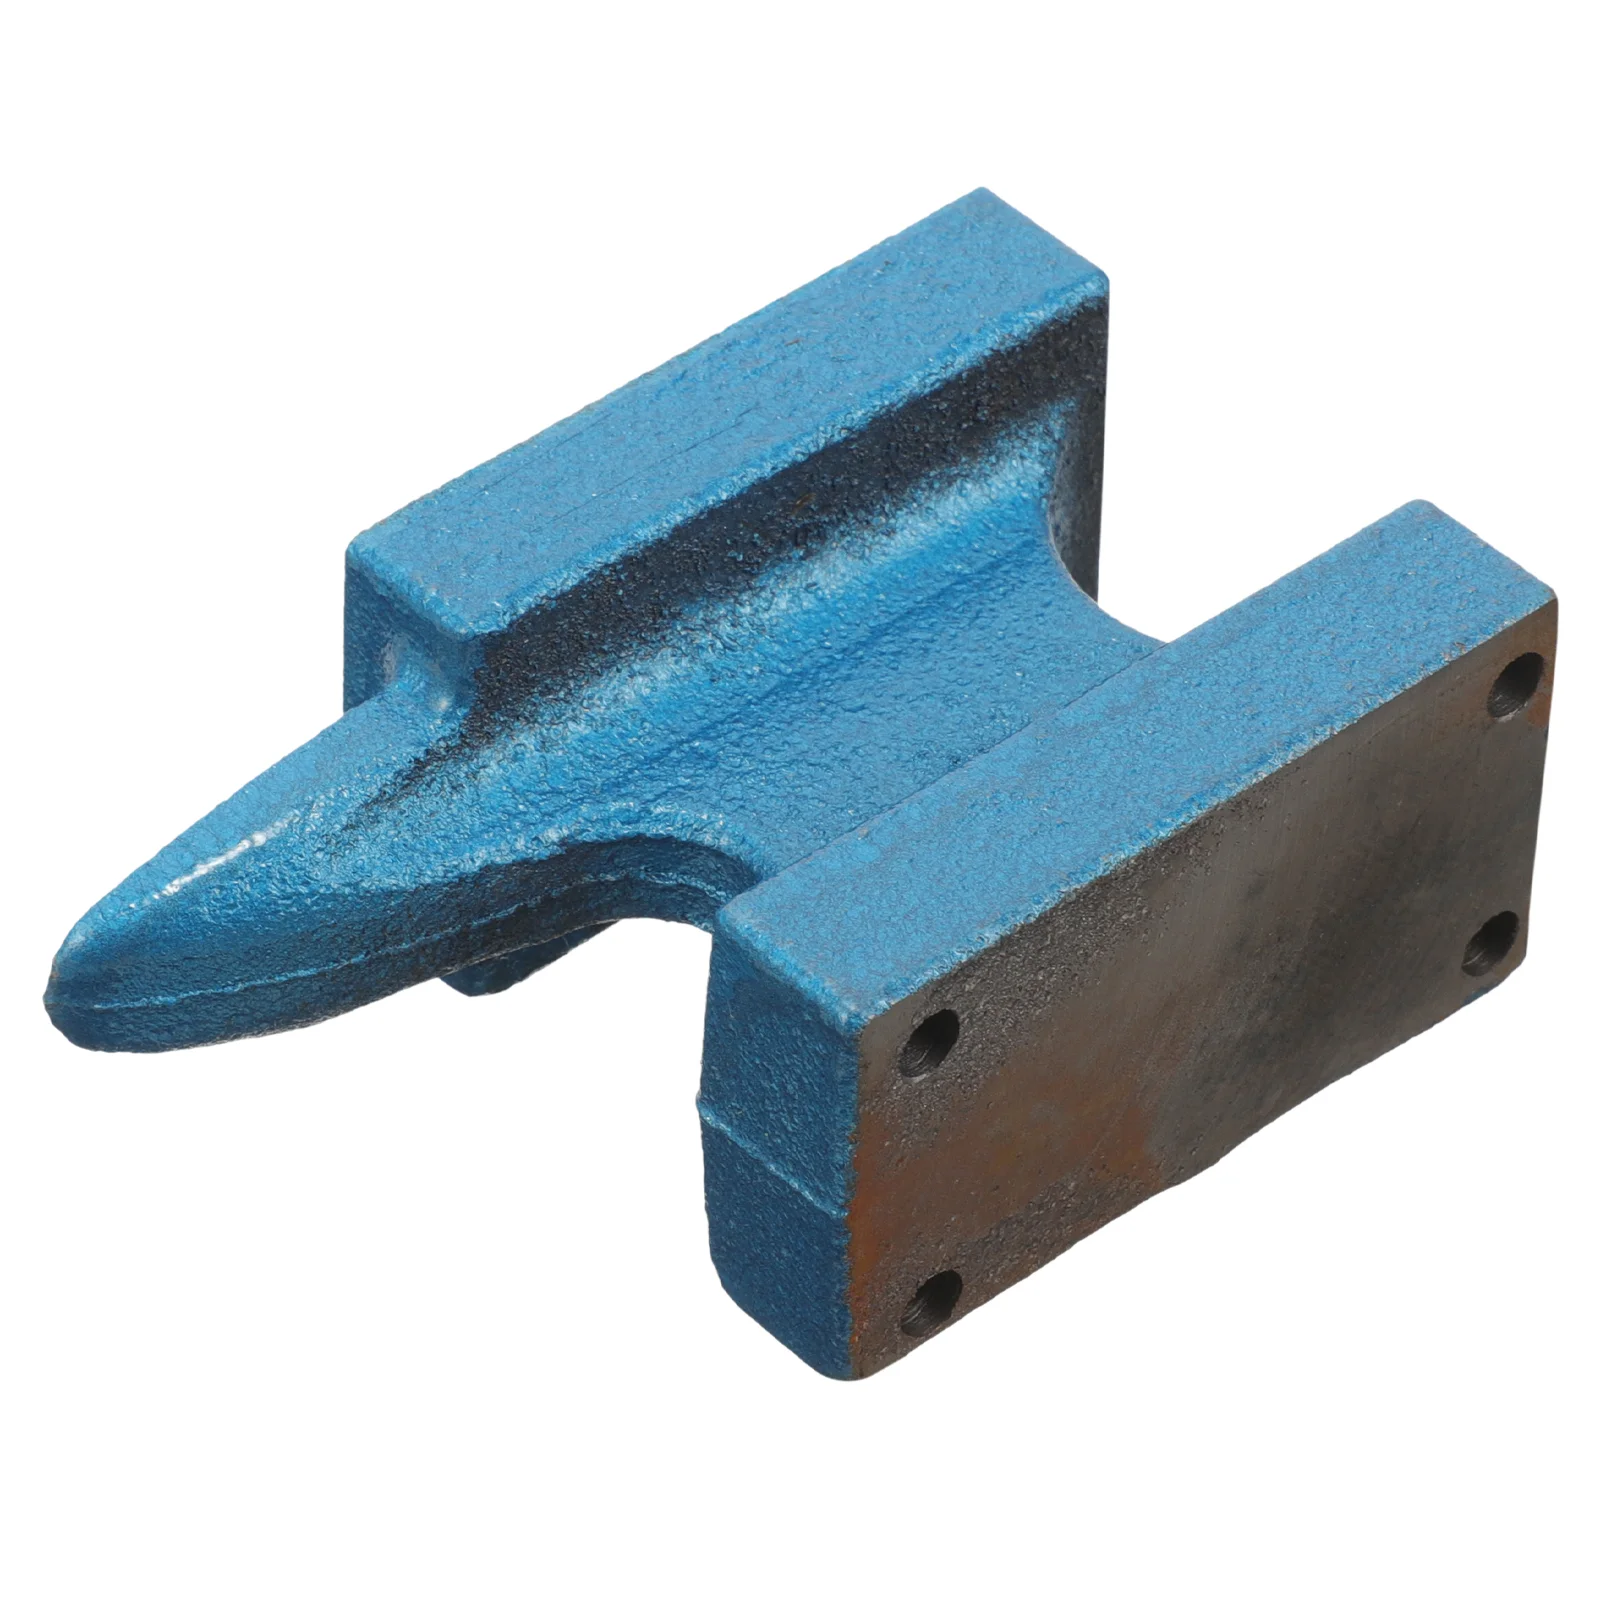 Mini Horn Anvil Forged Iron Anvil Bench Block Anvil Cast Iron Hobby Anvil Metal Forming Tool Blacksmith Forge Kit Jewelry Making